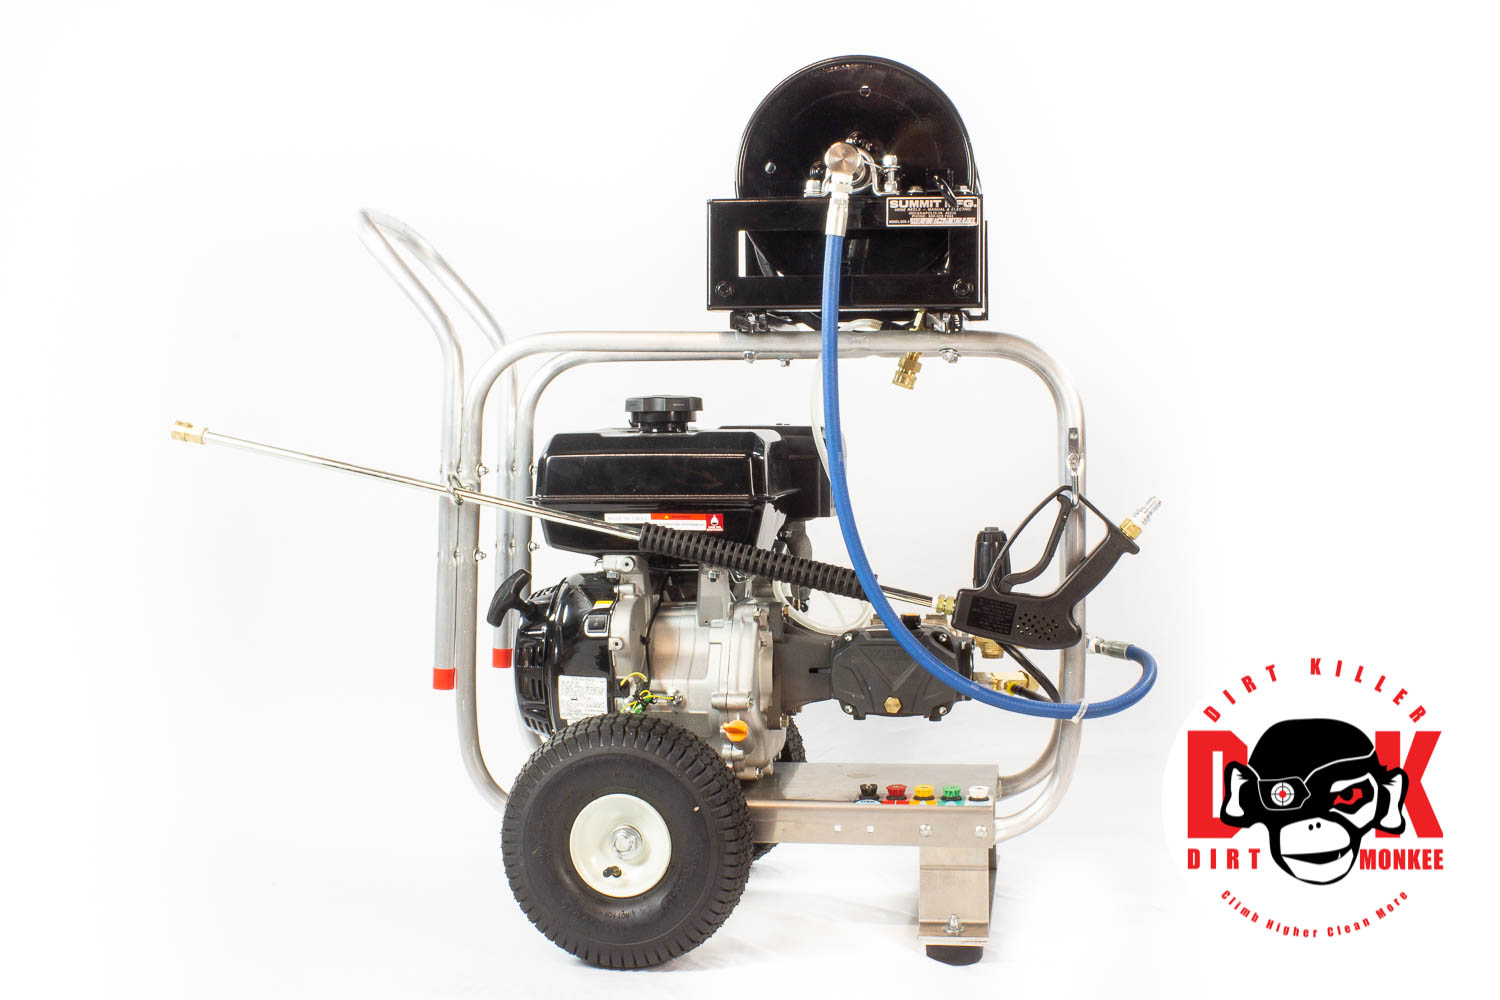 Dirt Monkee 15hp Power Ease AR Viper Pump 4gpm 4200 psi rollover frame hose reel-image_6